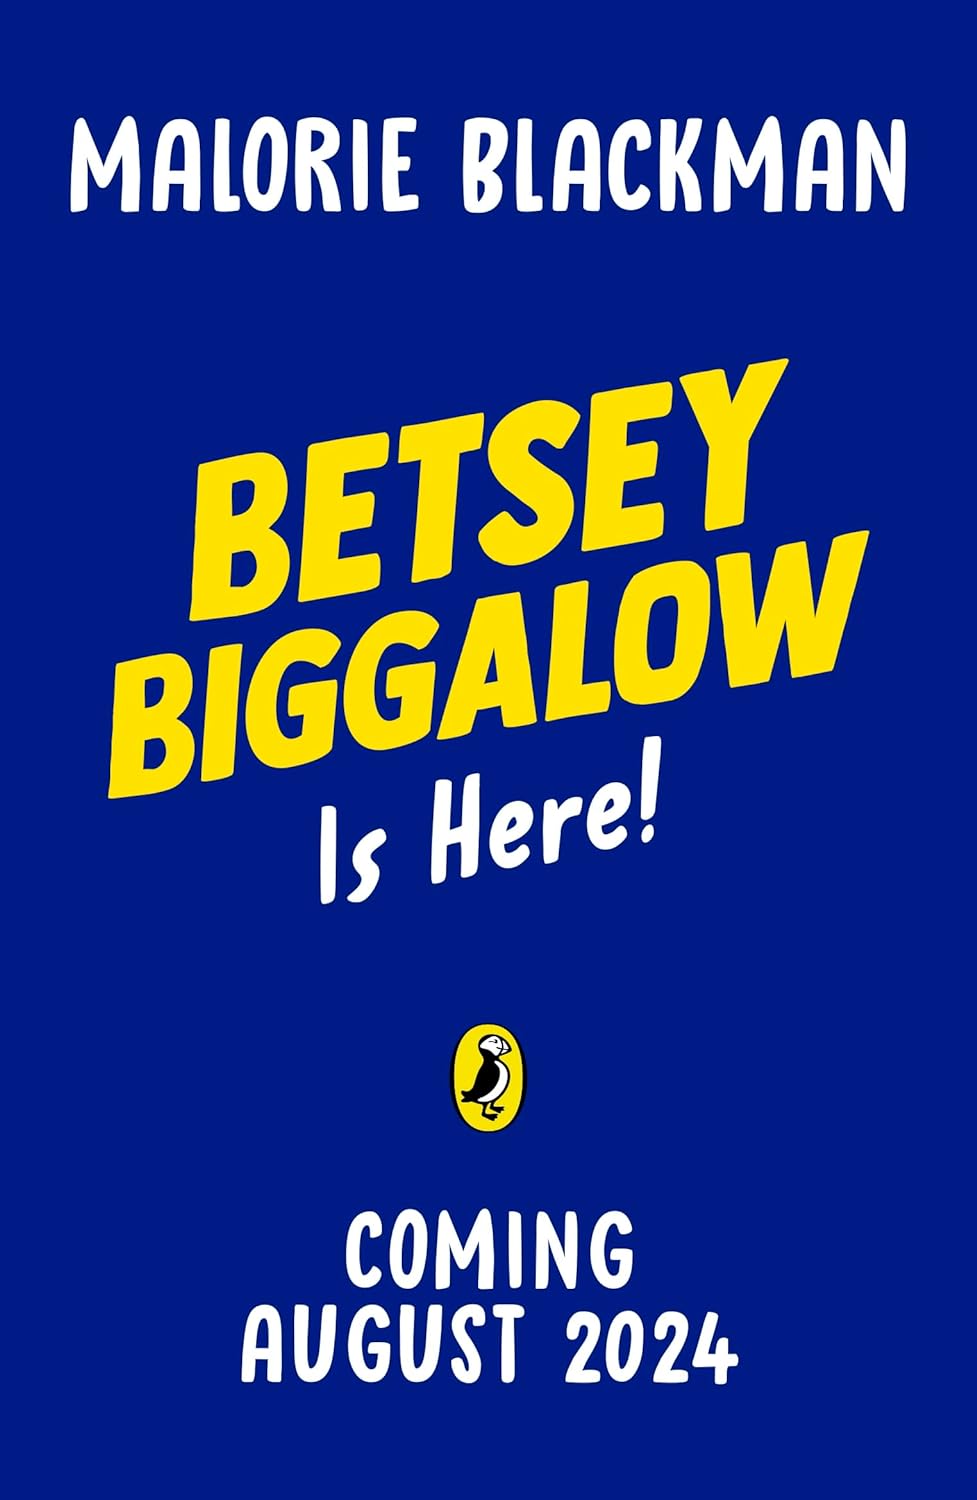 Betsey Biggalow is Here! (The Betsey Biggalow Adventures) - PREORDER